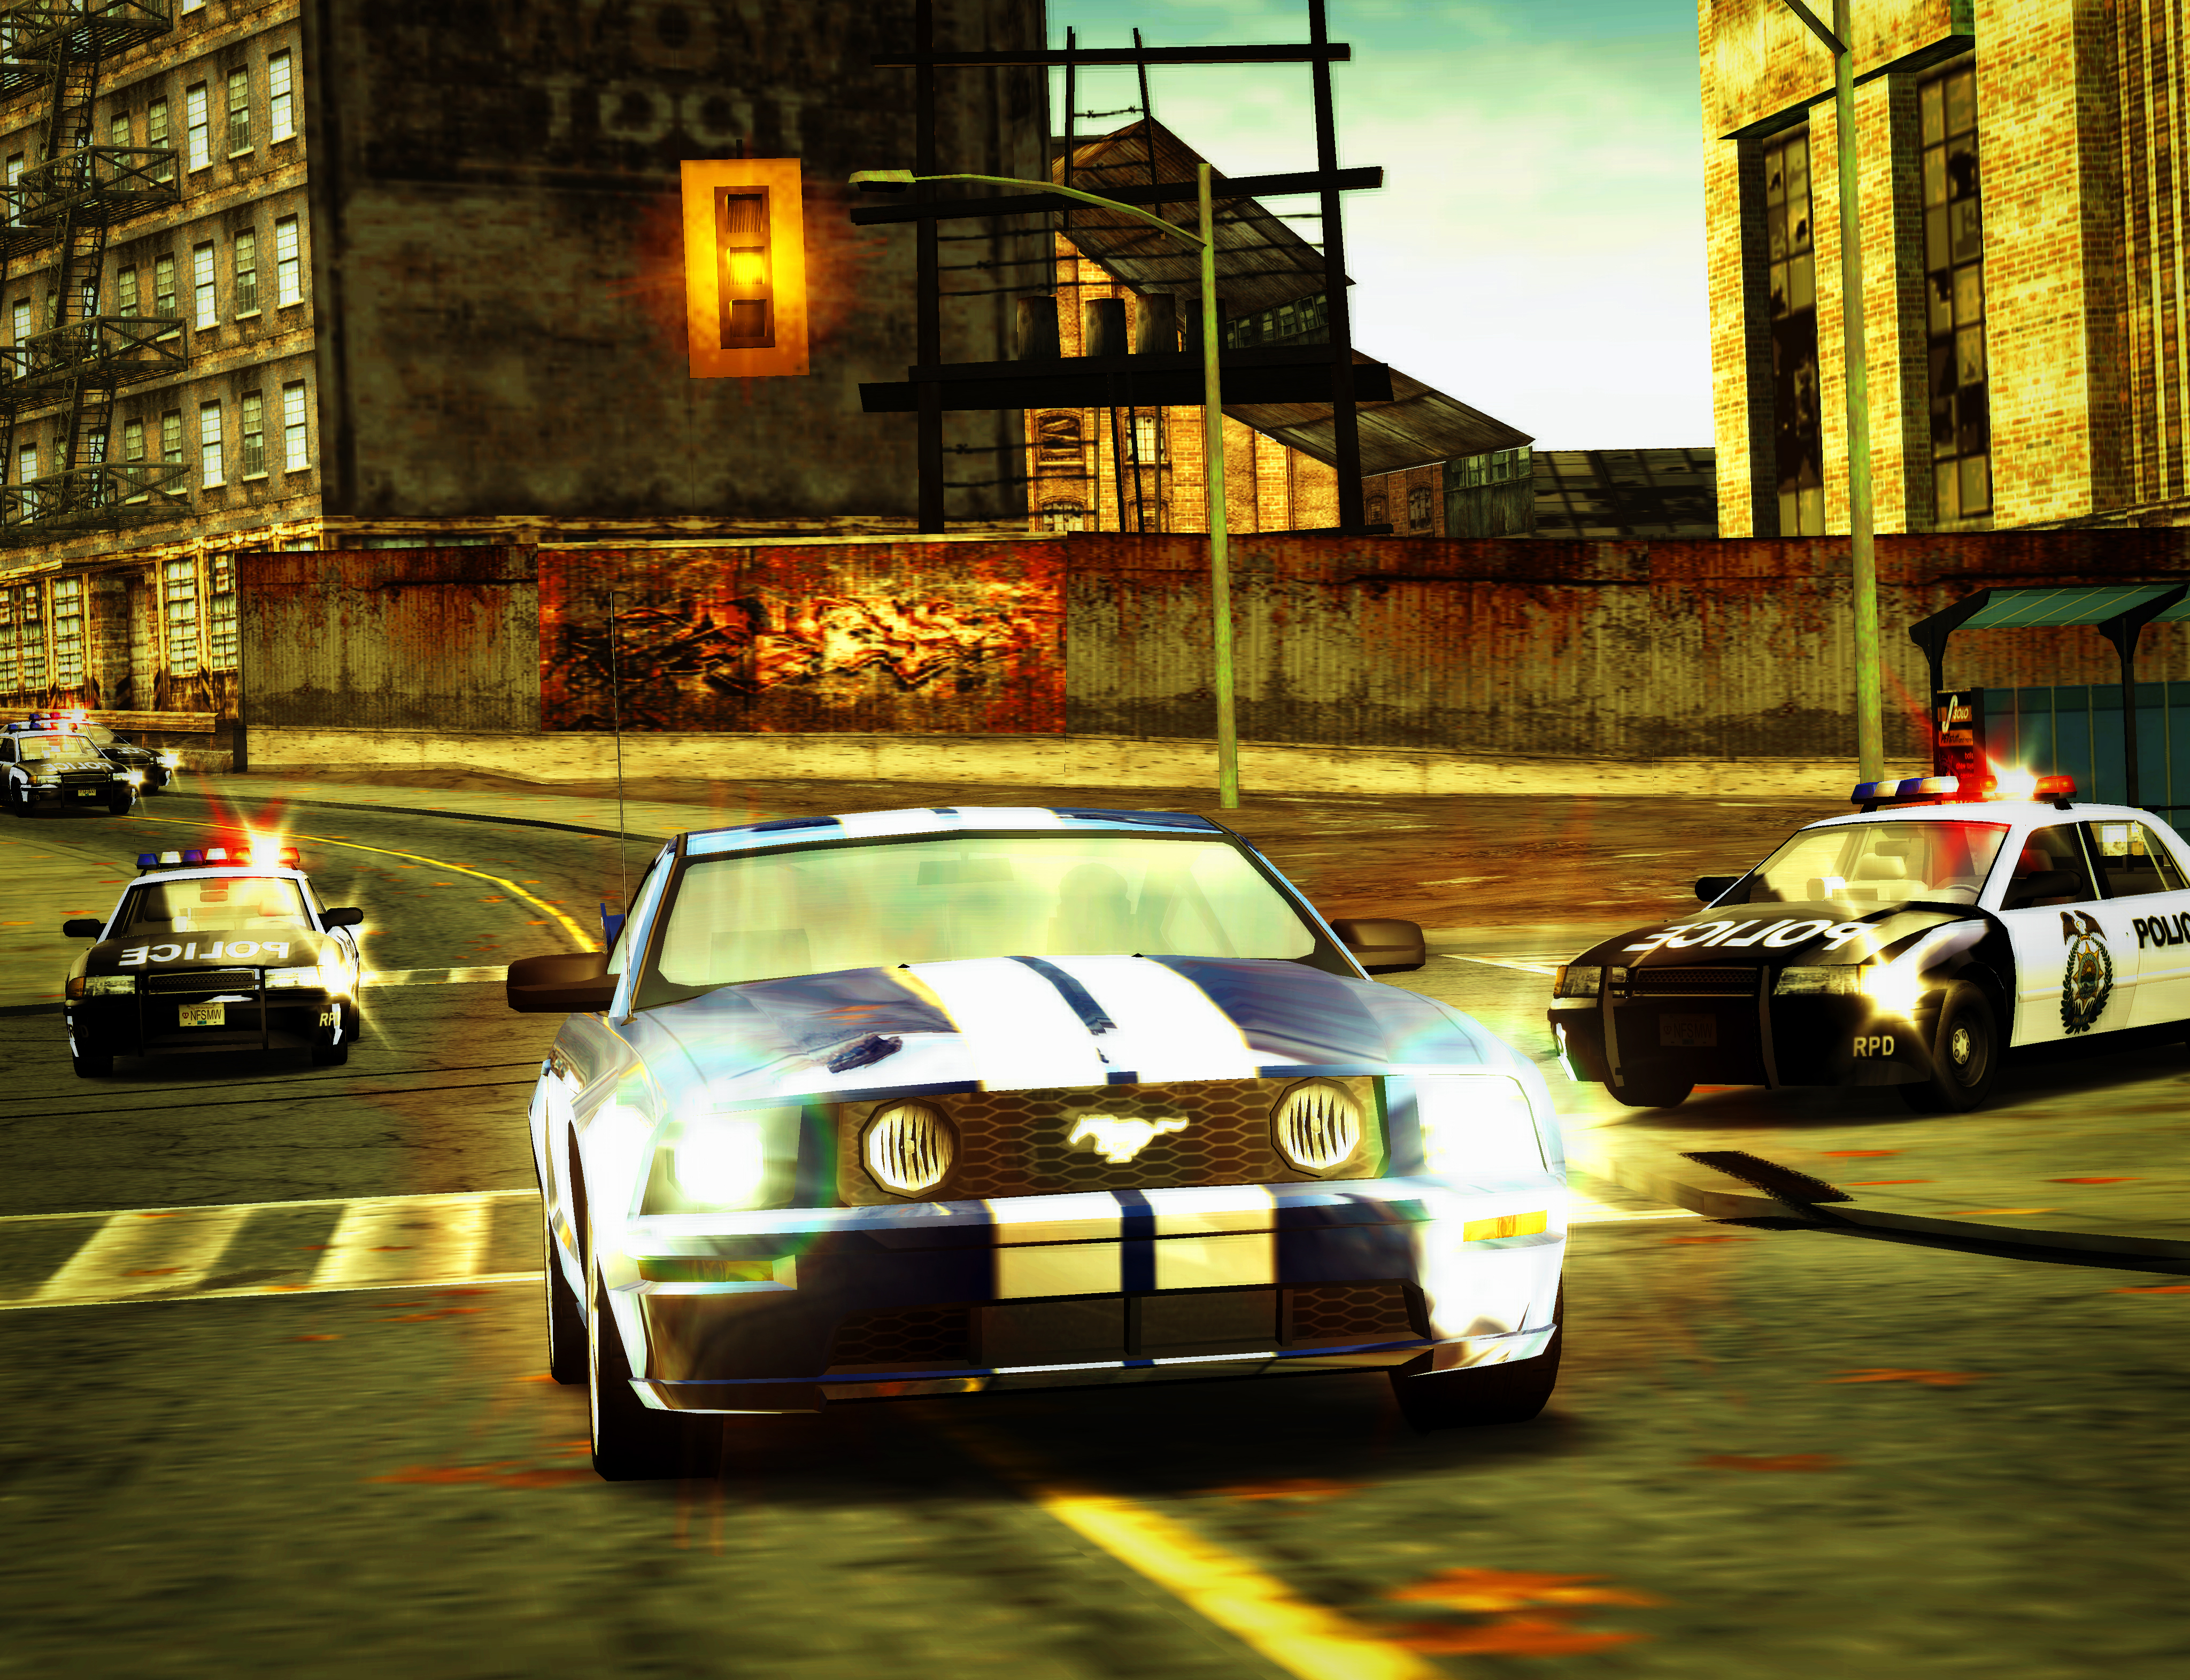 Образ игры need for speed. Need for Speed most wanted 2005. Нфс МВ 2005. Гонки NFS most wanted. Гонки NFS most wanted 2005.